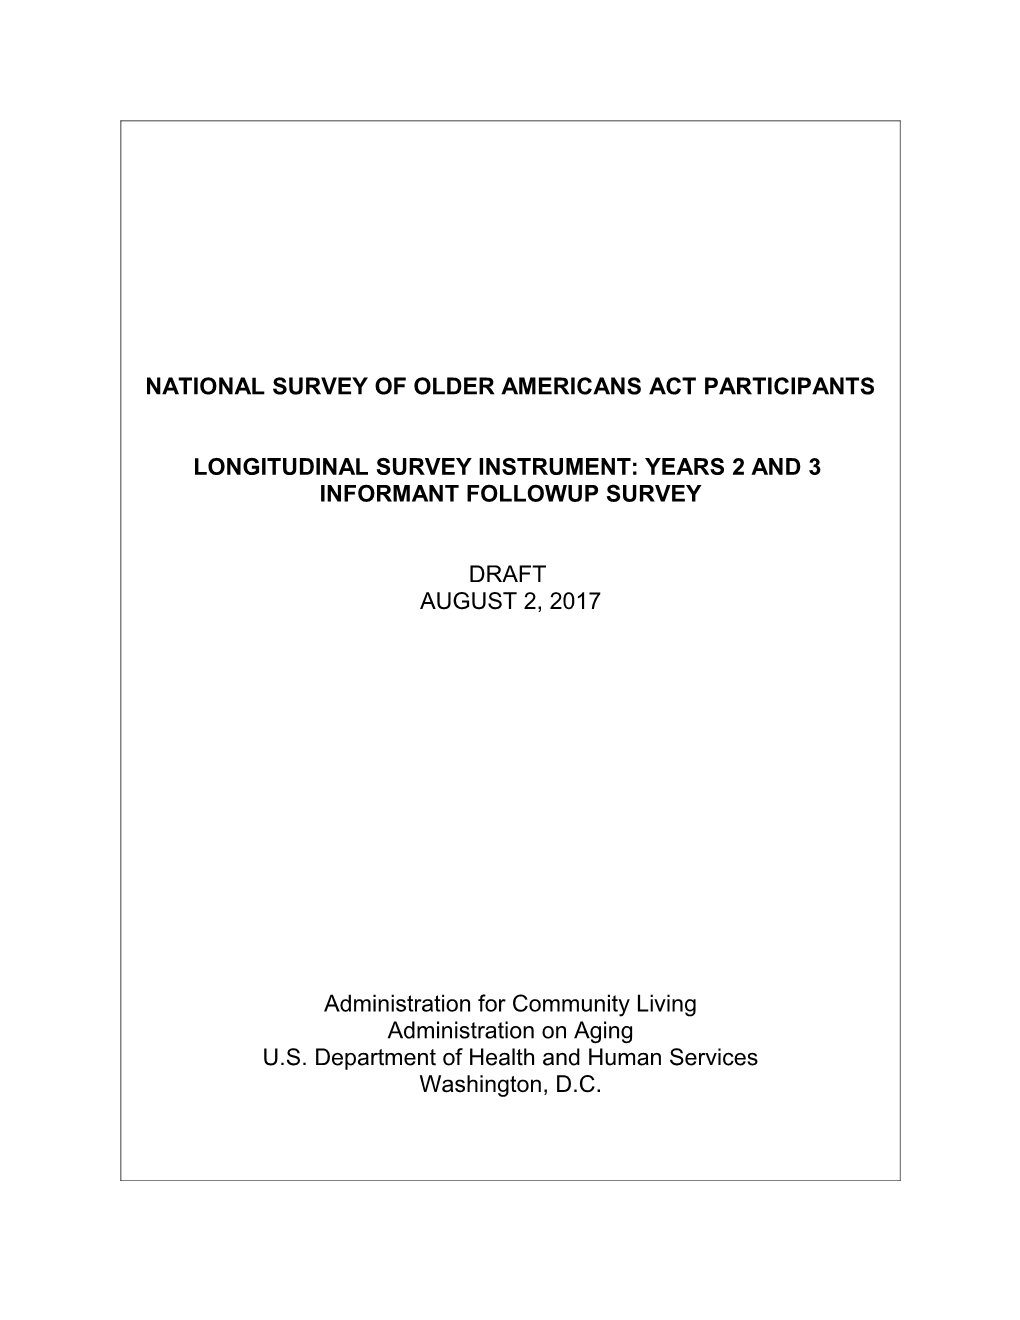 National Survey of Older Americans Act Participants